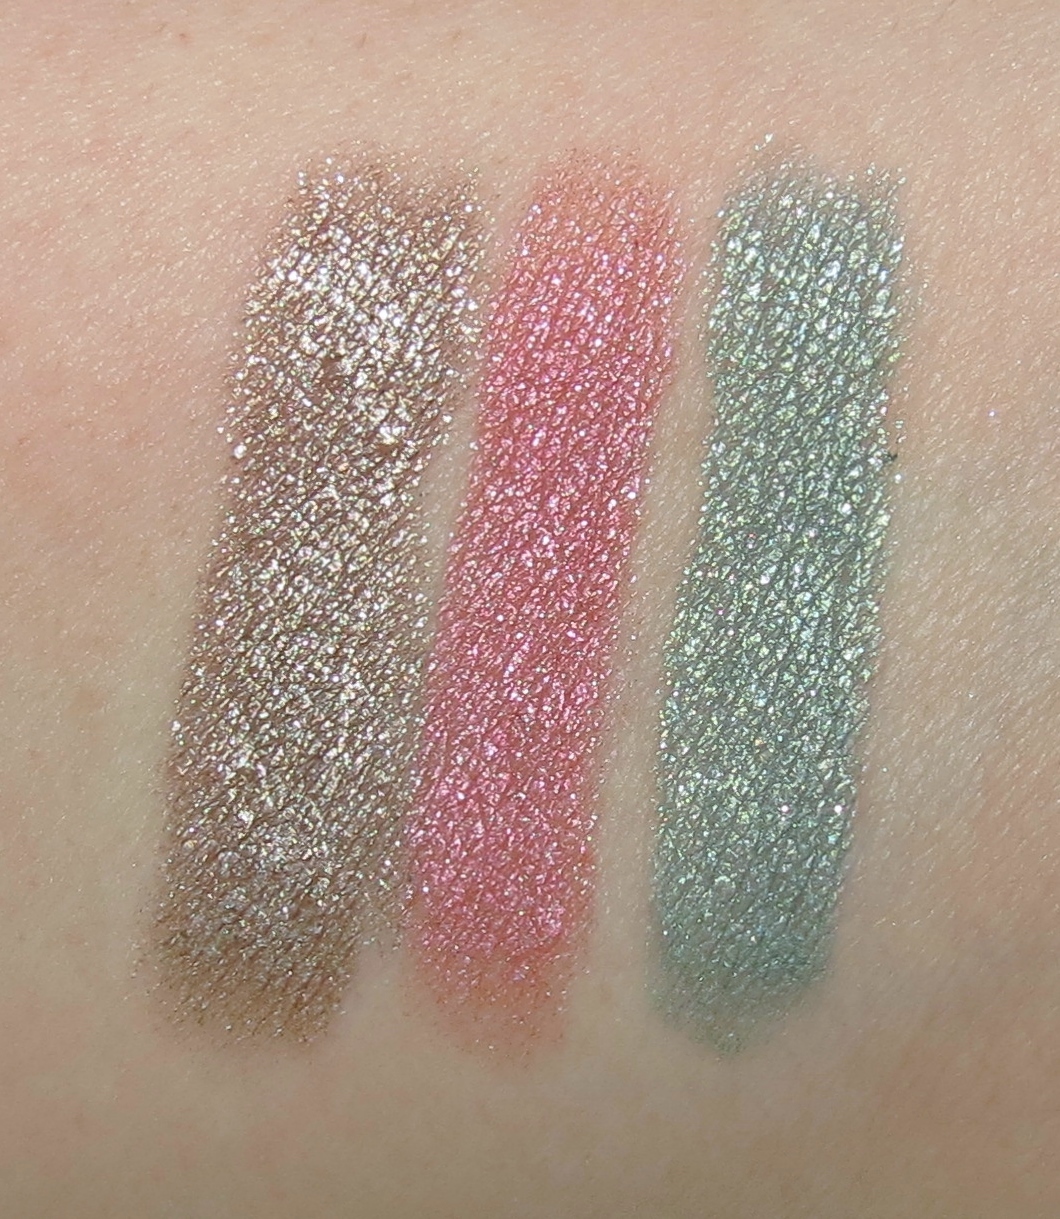 Chanel MOON RIVER 07, PINK LAGOON 27, JADE SHORE 37 Stylo Eyeshadow Swatches,  Review & FOTD - L'Ete Papillon de Chanel Collection for Summer 2013 -  Blushing Noir